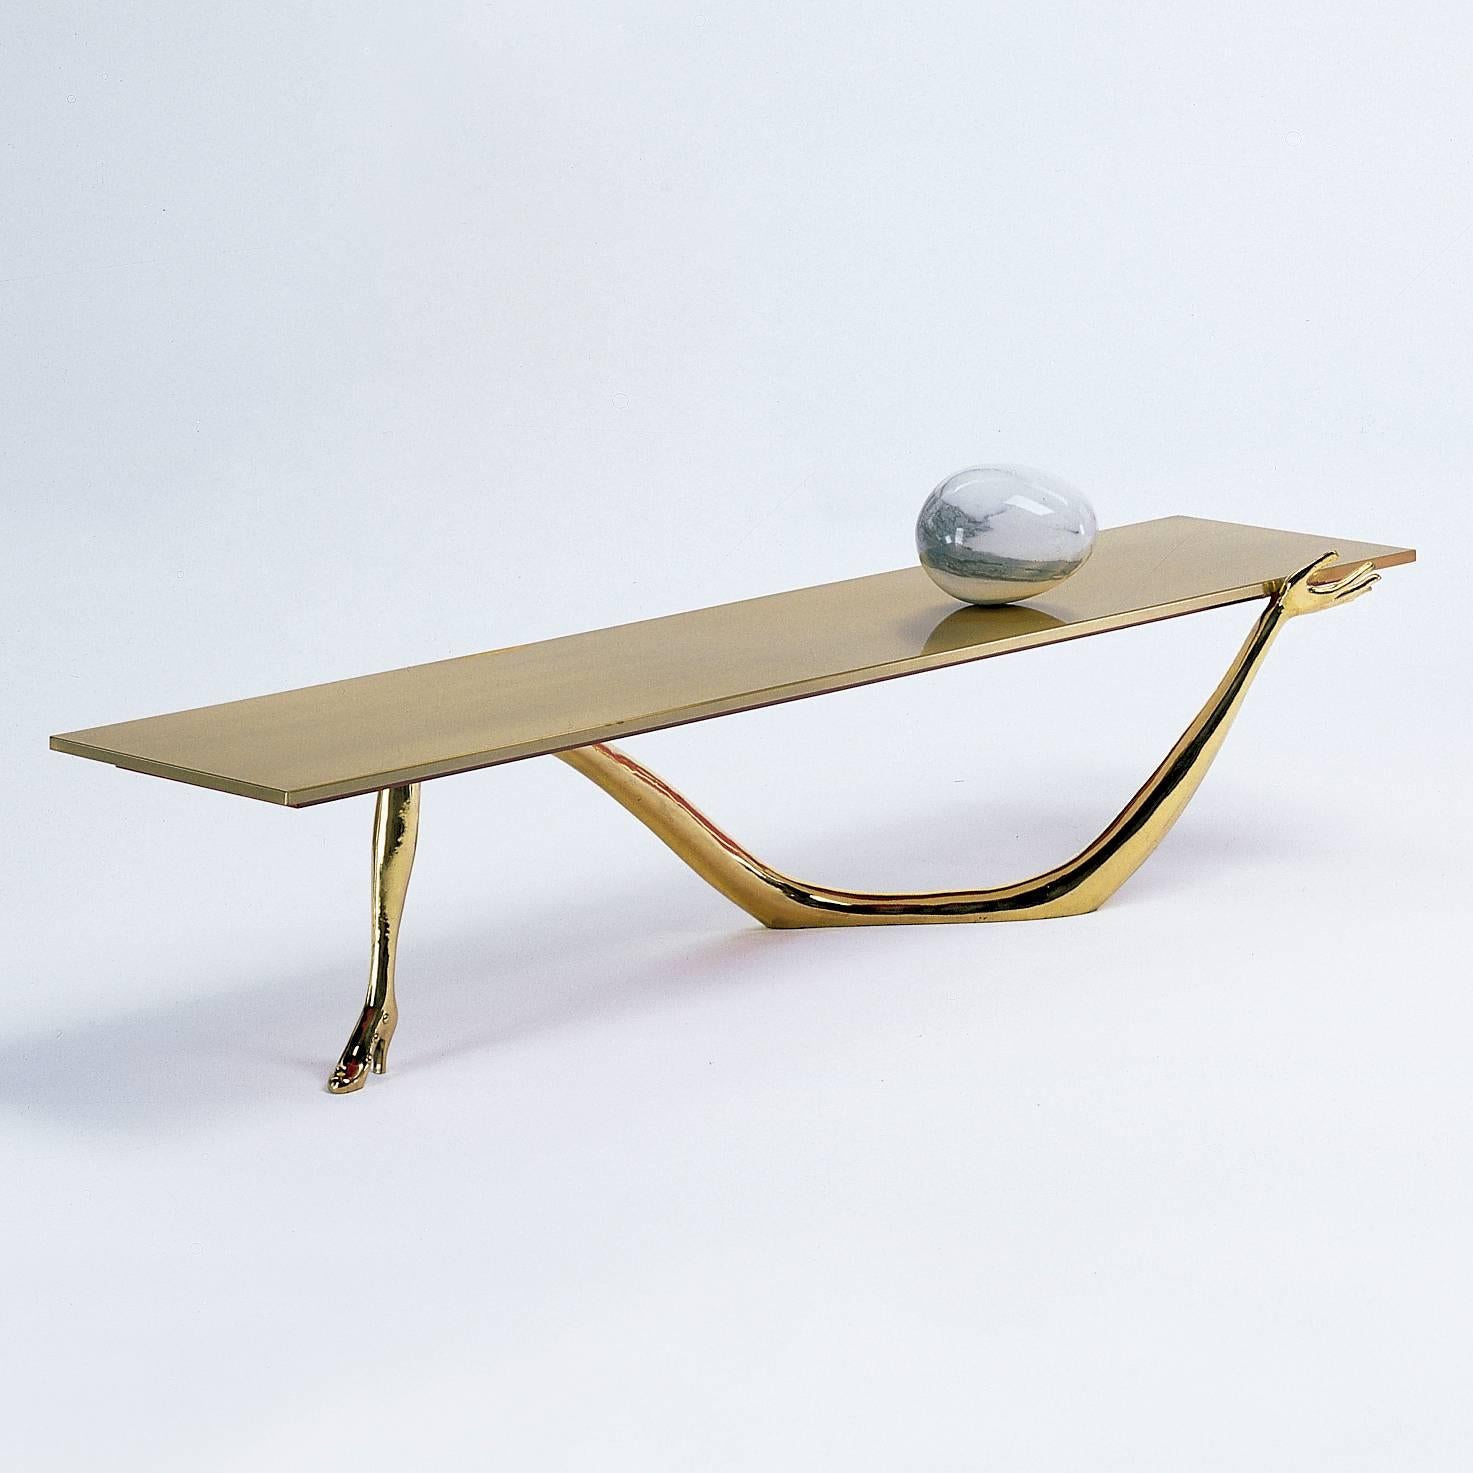 Leda low table designed by Dali manufactured by BD.

Legs are in a cast varnish brass.
Tabletop in brushed and varnished brass.
Carrara marble egg on top.

Measures: 51 x 190 x 61 H.cm

During the ‘thirties in Paris, Salvador Dalí surrounded himself